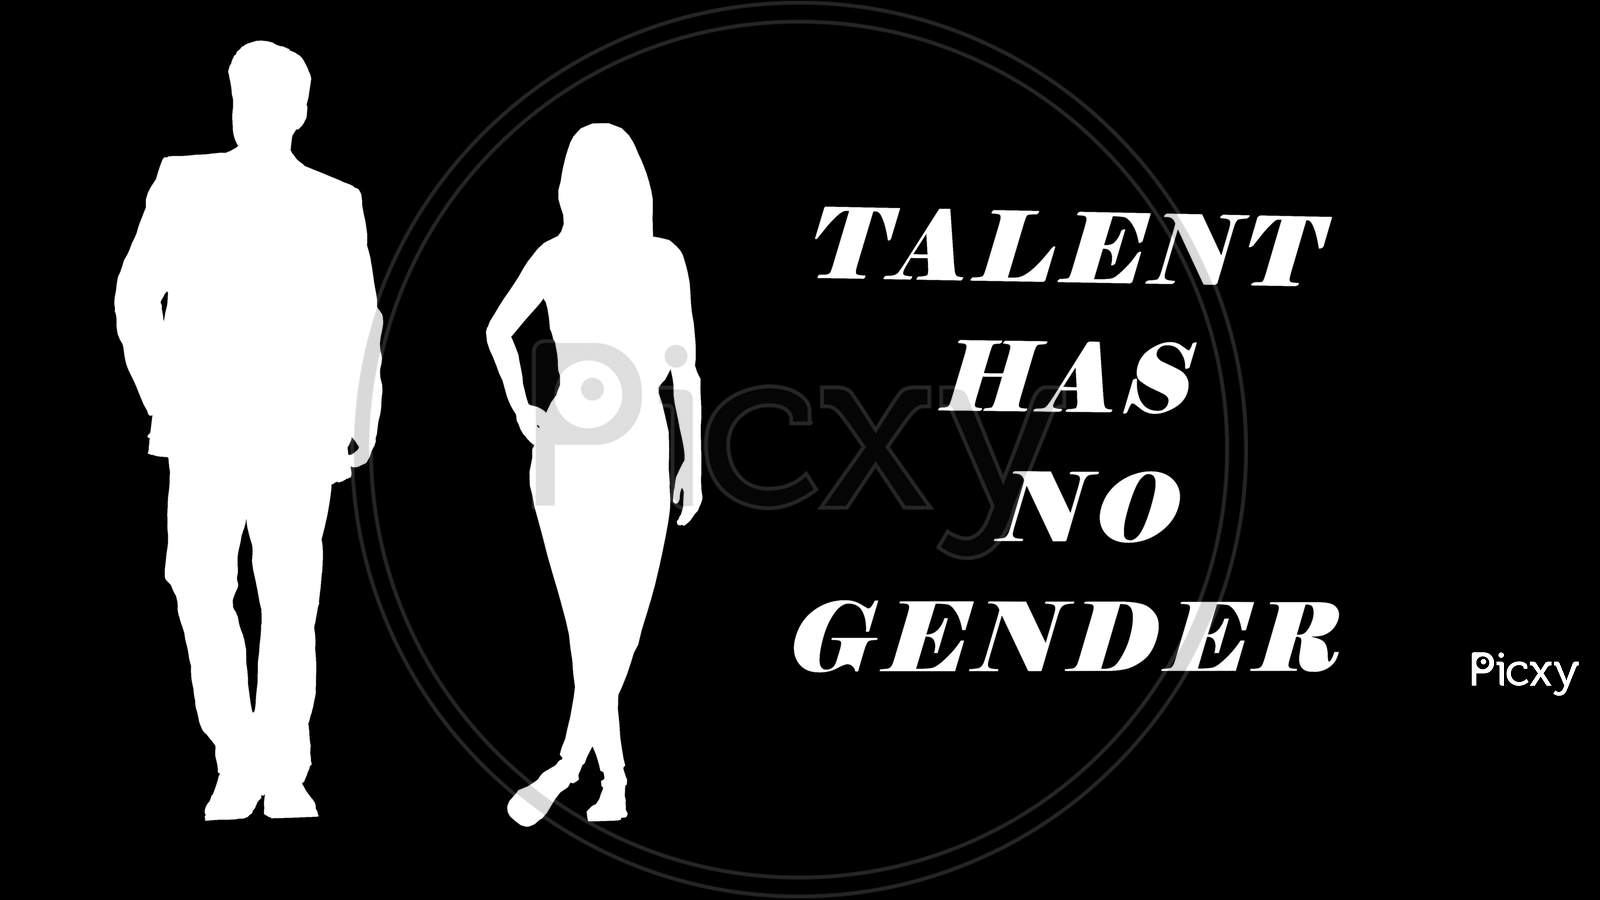 Here Is No Gender Like Man And Woman For Talent In This World. That'S Showing This Image.